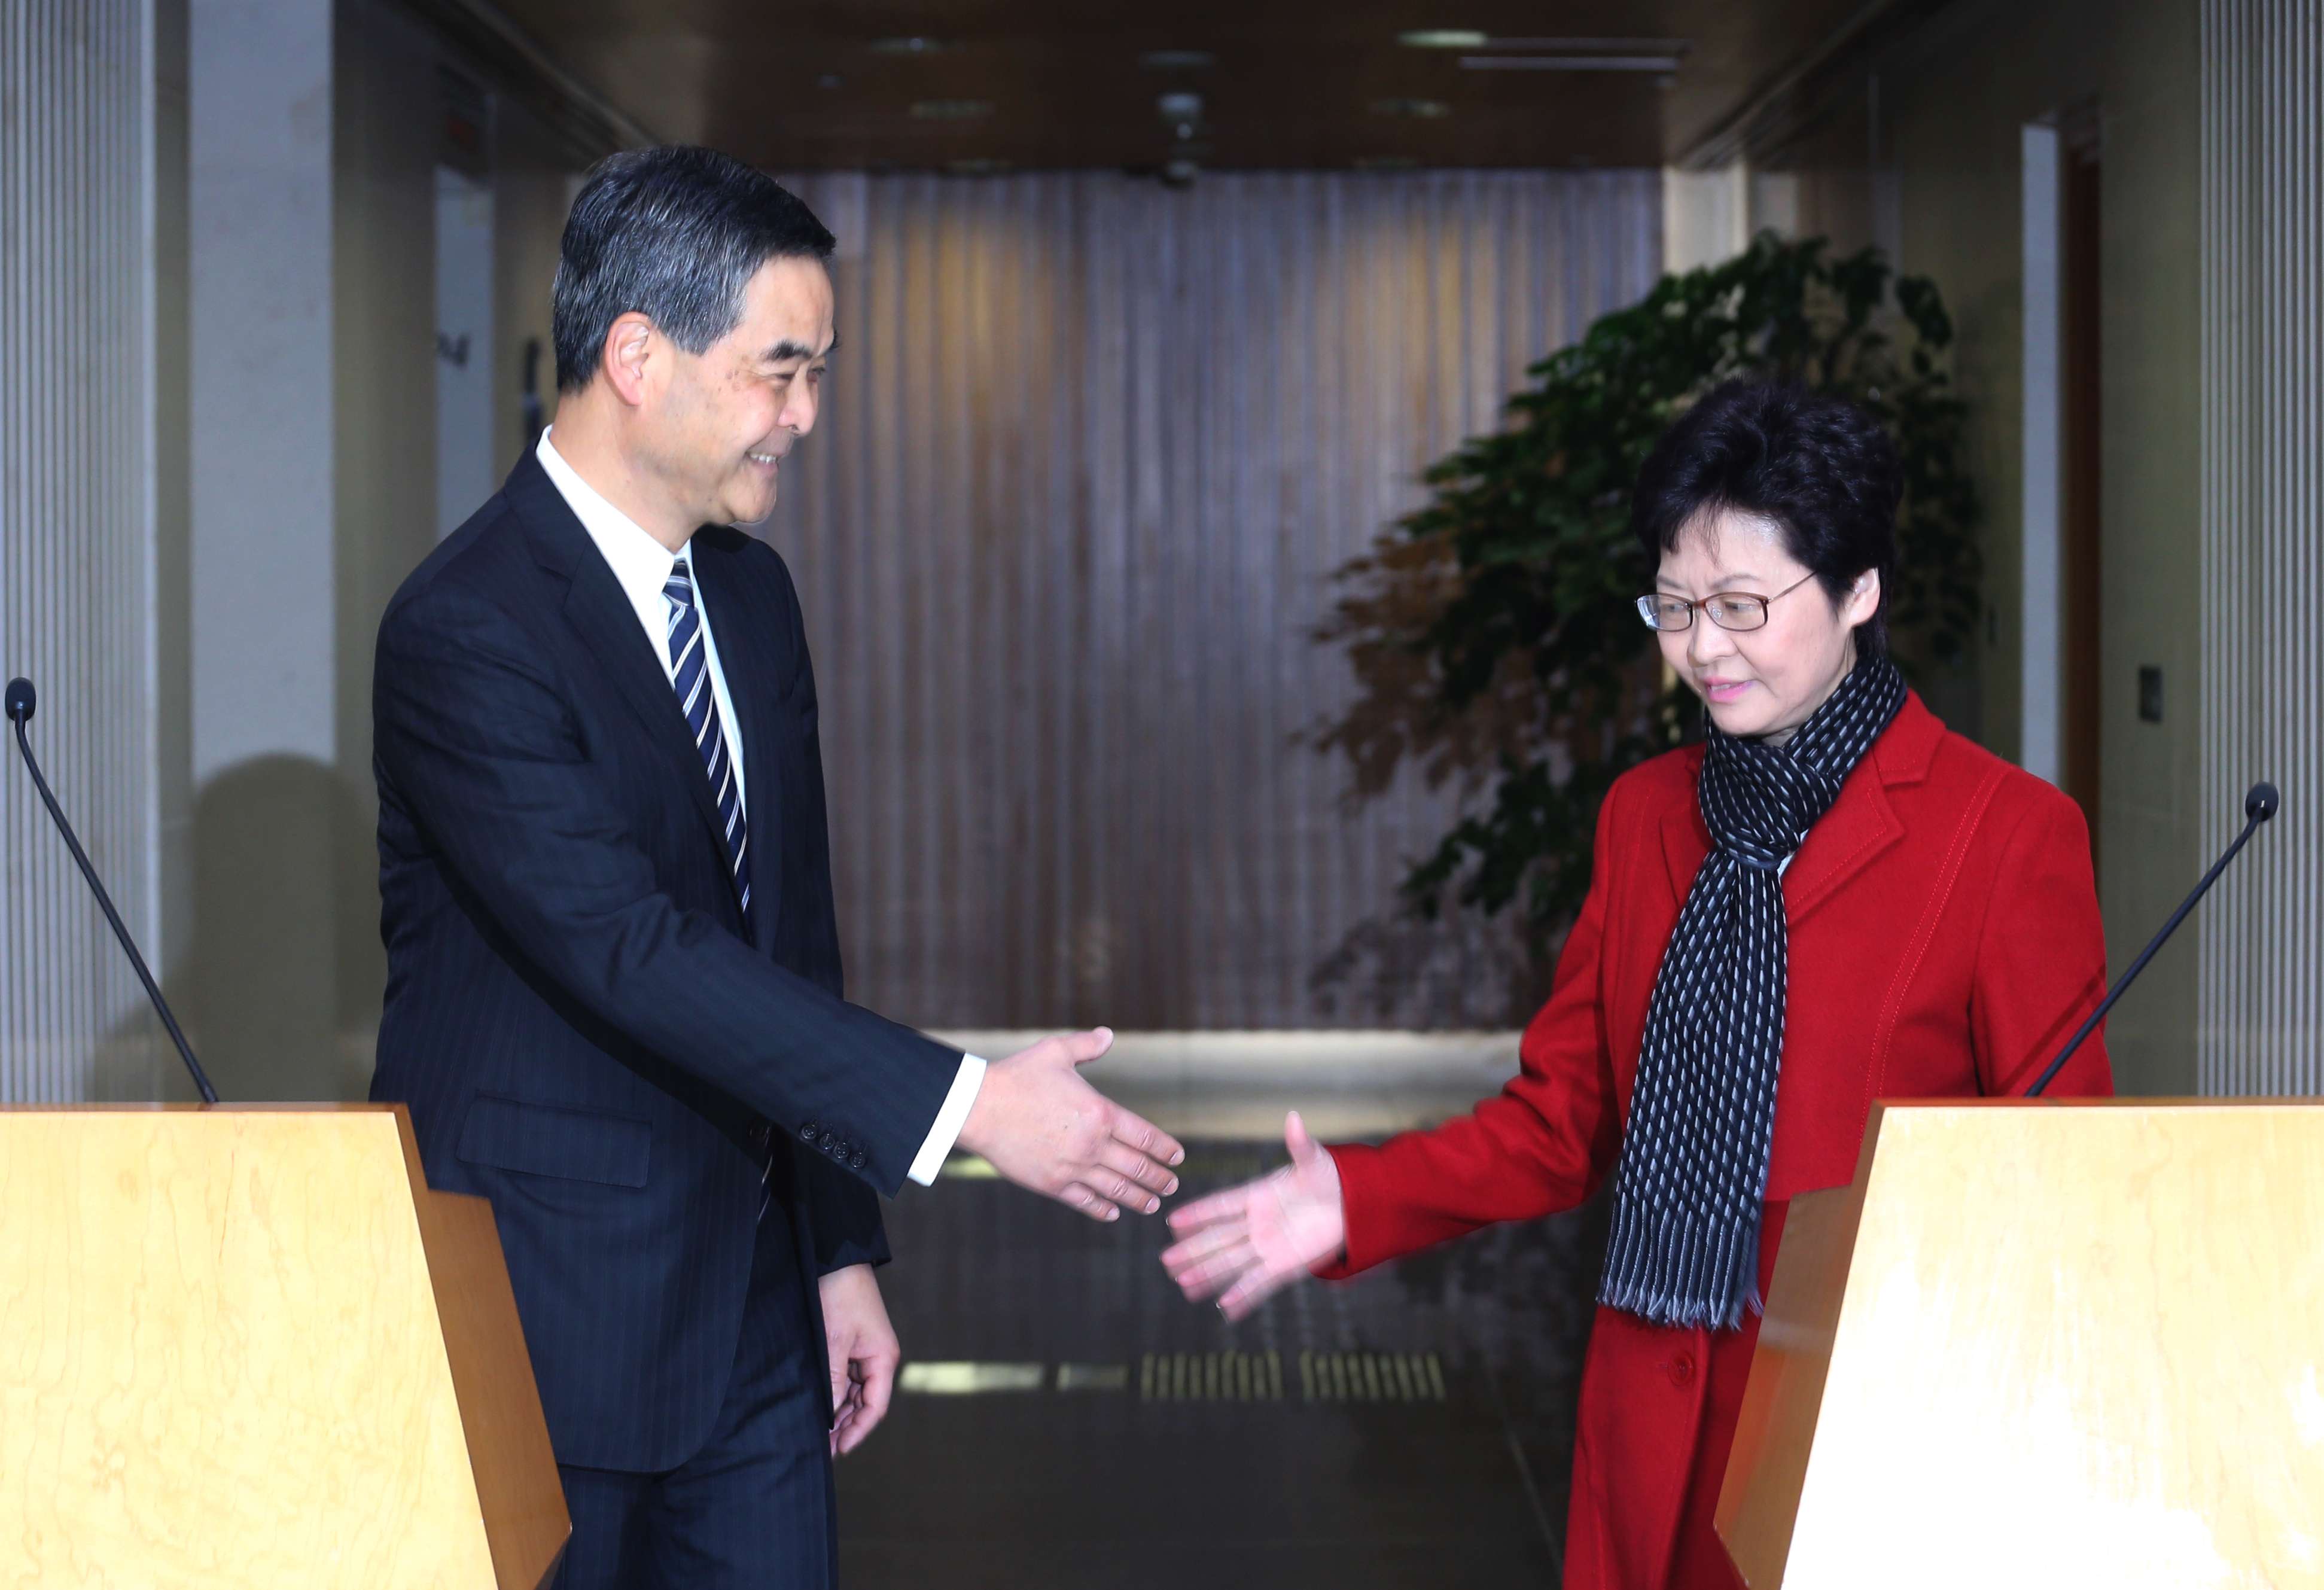 Chief executive-elect Carrie Lam Cheng Yuet-ngor (right) has recorded a higher popularity rating than her predecessor Leung Chun-ying (left), according to the latest HKU opinion poll. Photo: Felix Wong